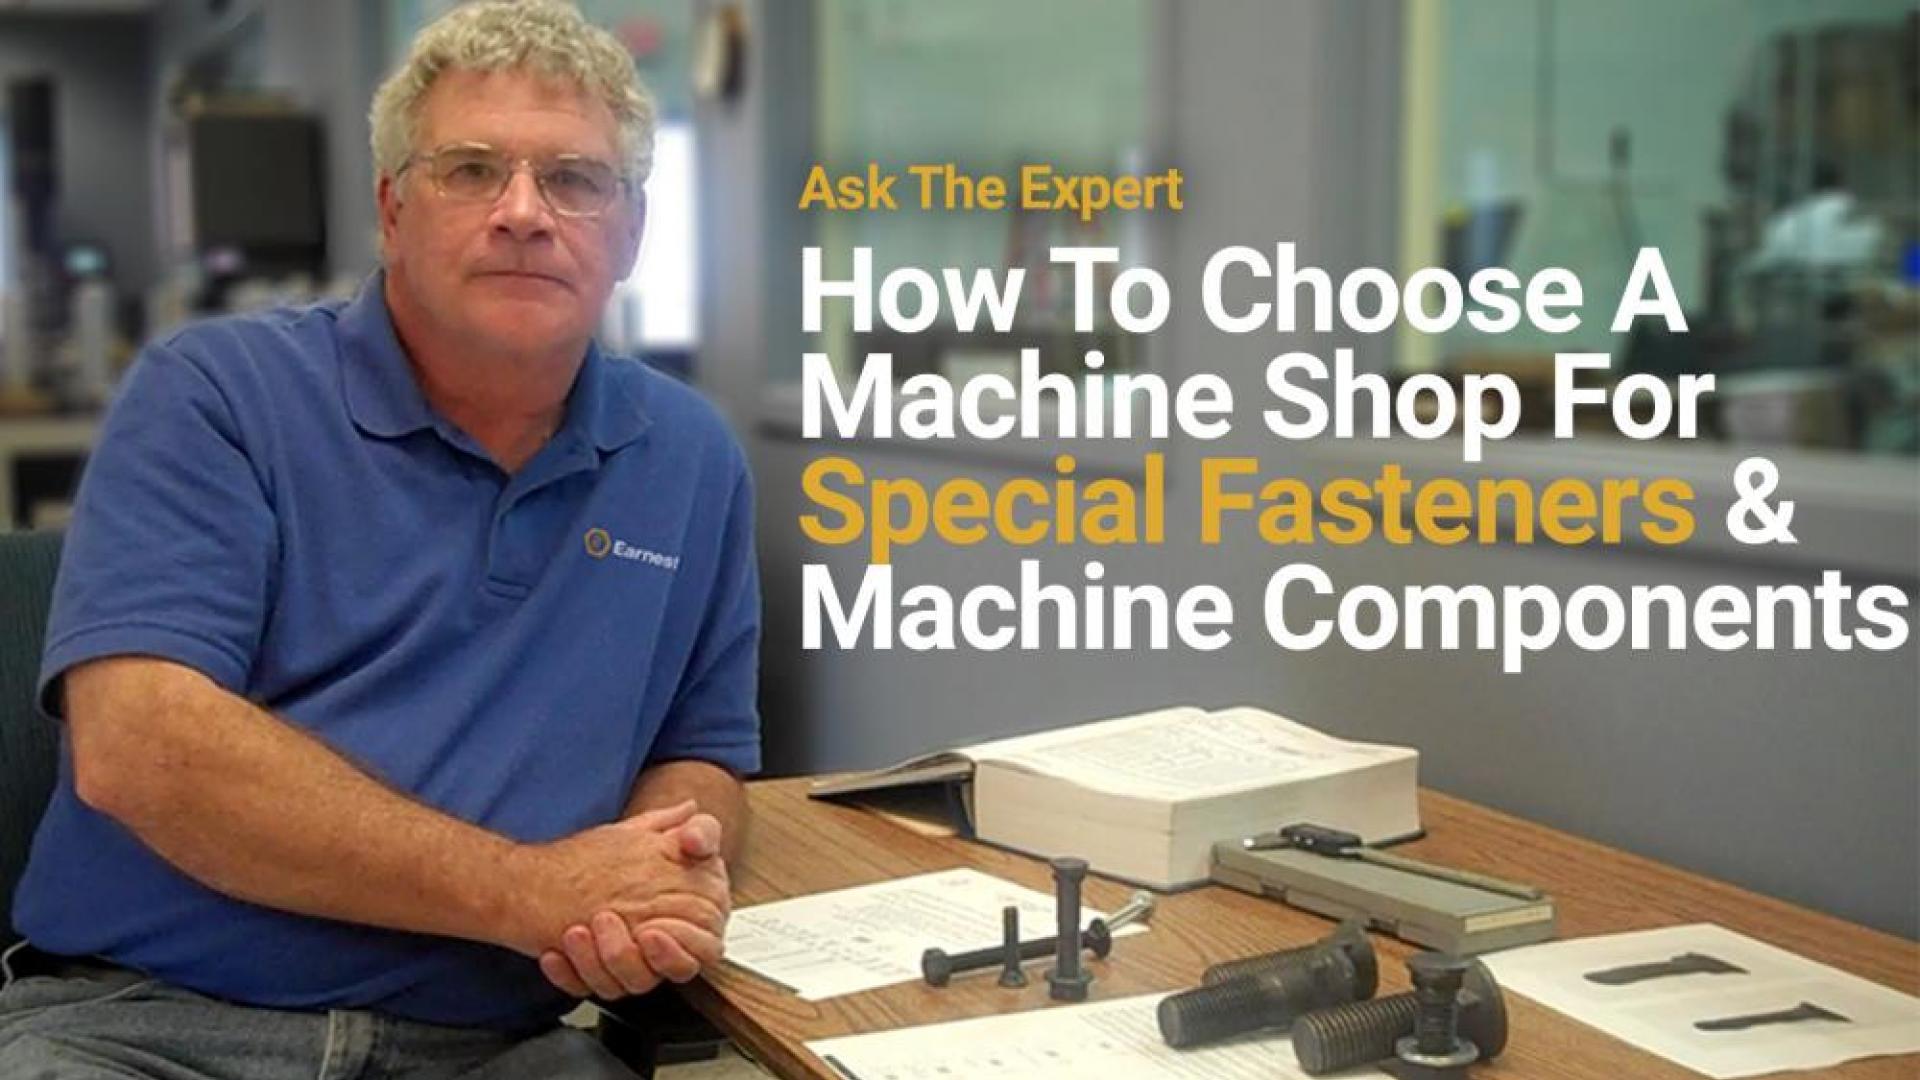 What To Look For In A Machine Shop